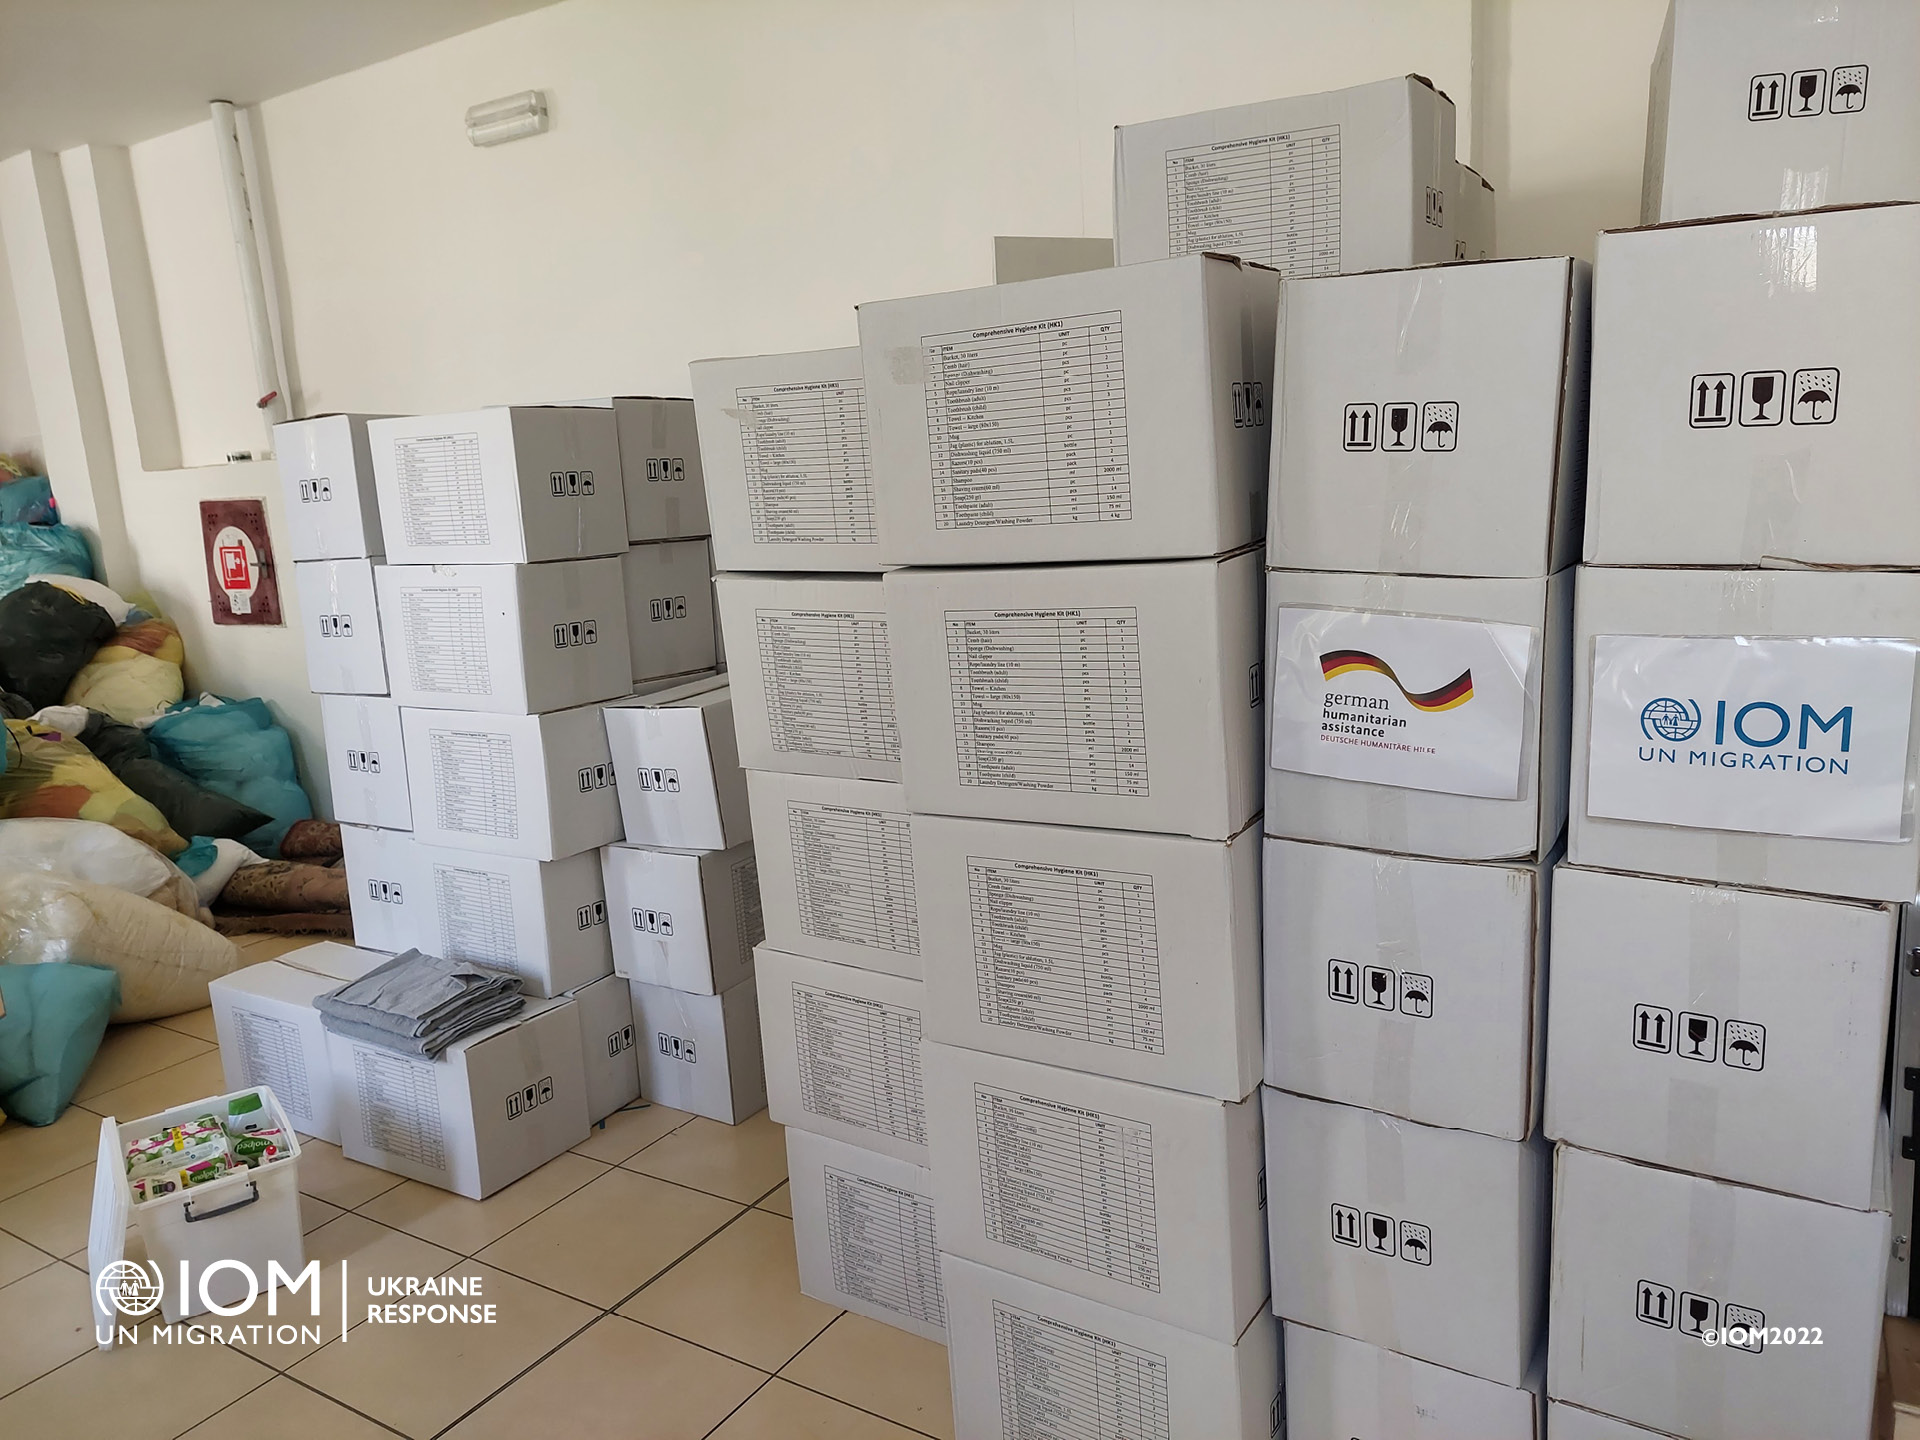 Hygienic kits delivery to the Michalovce Registration Centre. Photo © International Organization for Migration (IOM) 2022.